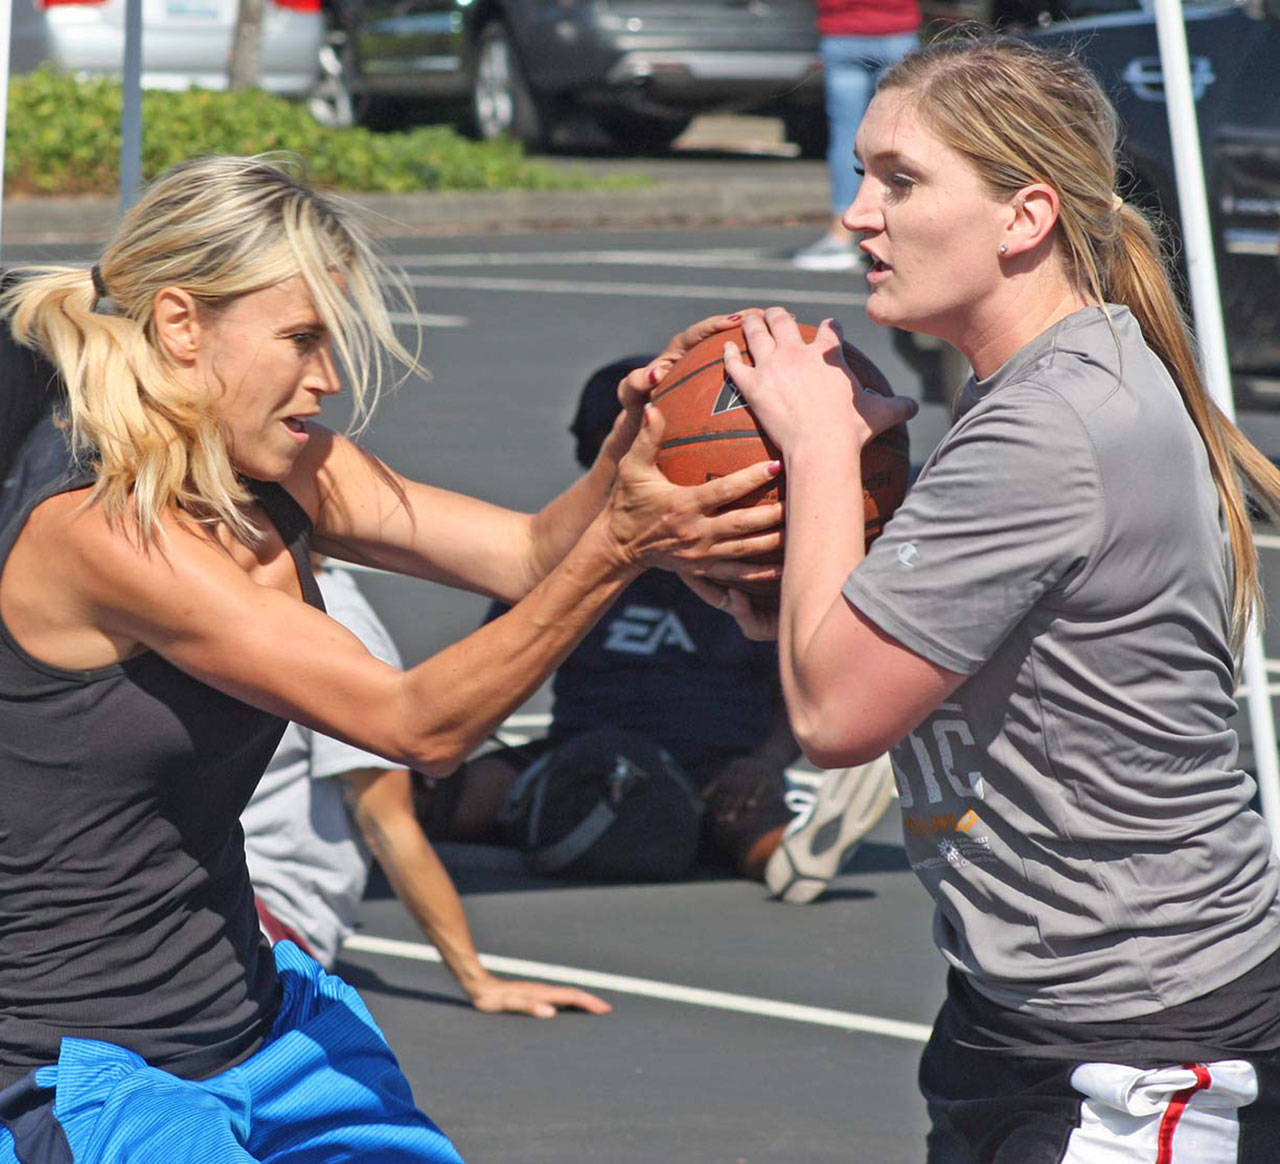 Maple Valley’s Julie Anderson, left, of Still Ball’n, and Auburn’s Tera McCann-Soushek, of West Coast Hustlers, tangle for the ball during adult female division play. MARK KLAAS, Auburn Reporter